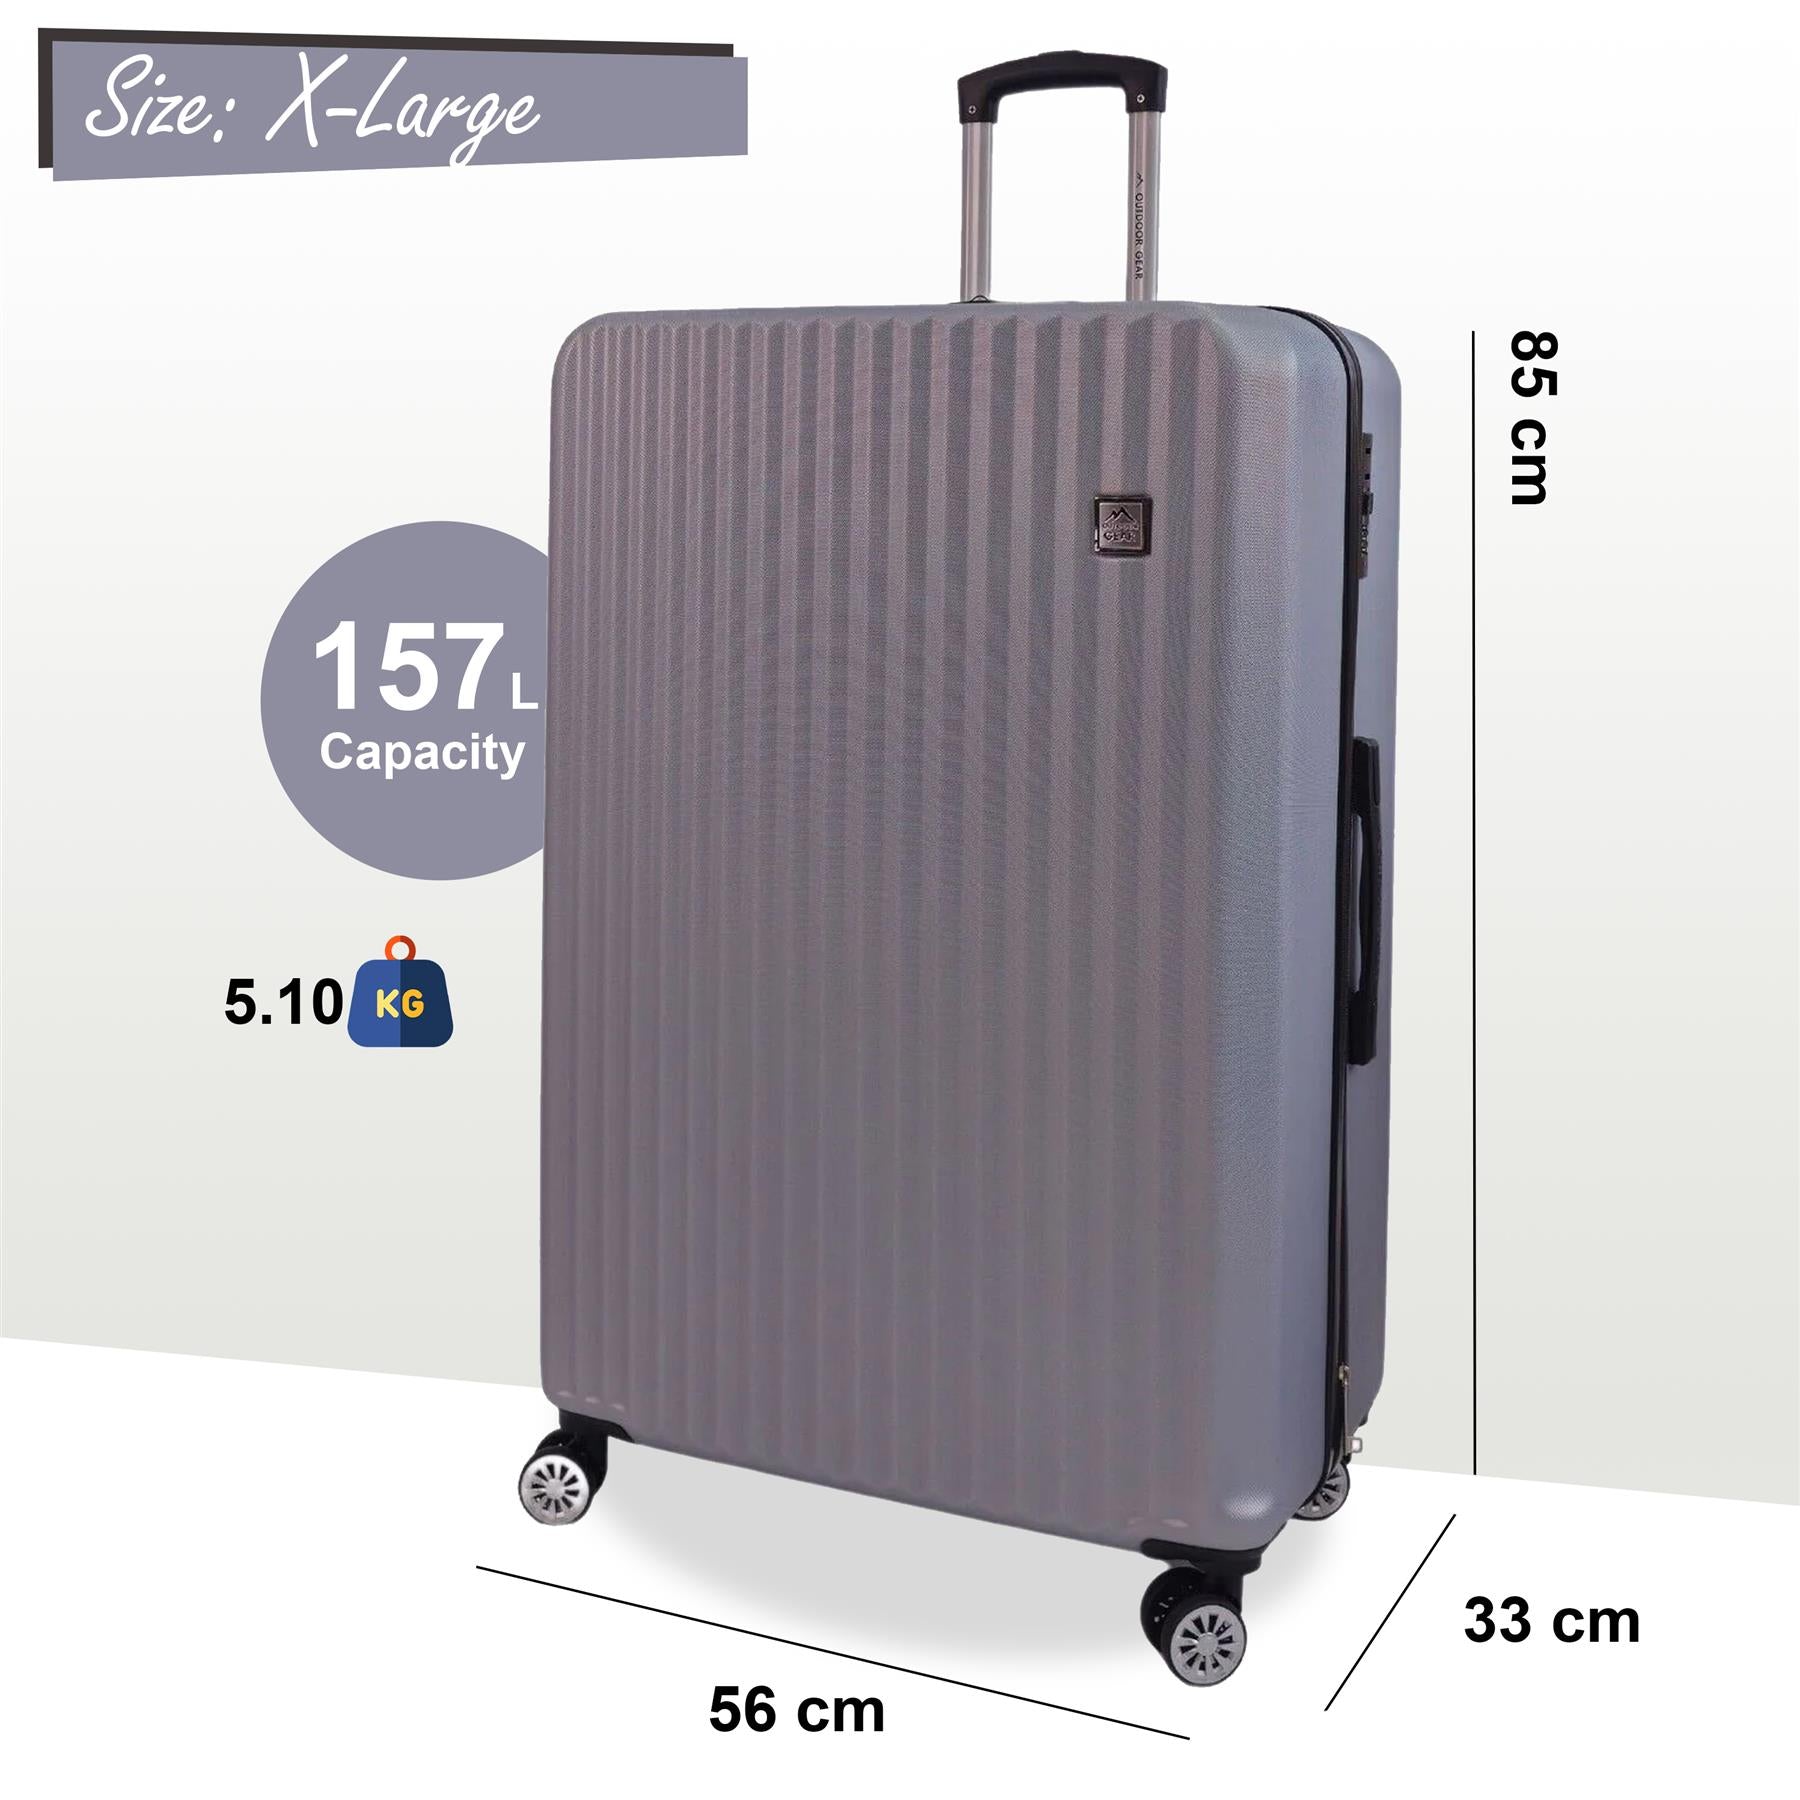 Albertville Extra Large Hard Shell Suitcase in Silver